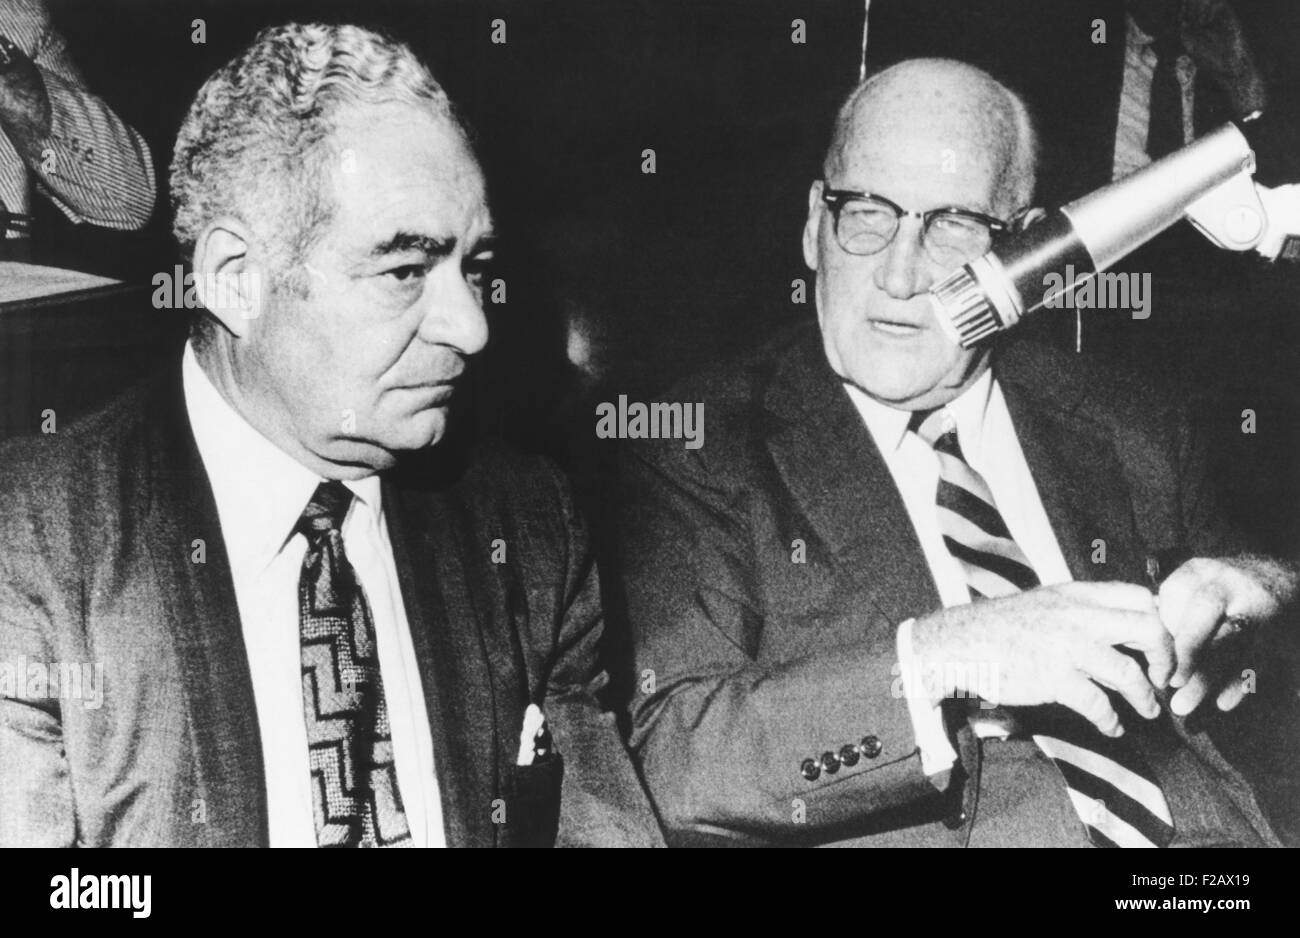 Sol Adoff (left) speaks with his lawyer John Toolan during testimony. June 24, 1970. Sol Adoff was under investigation for labor racketeering by the New Jersey State Commission on Organized Crime. (CSU 2015 11 1174) Stock Photo